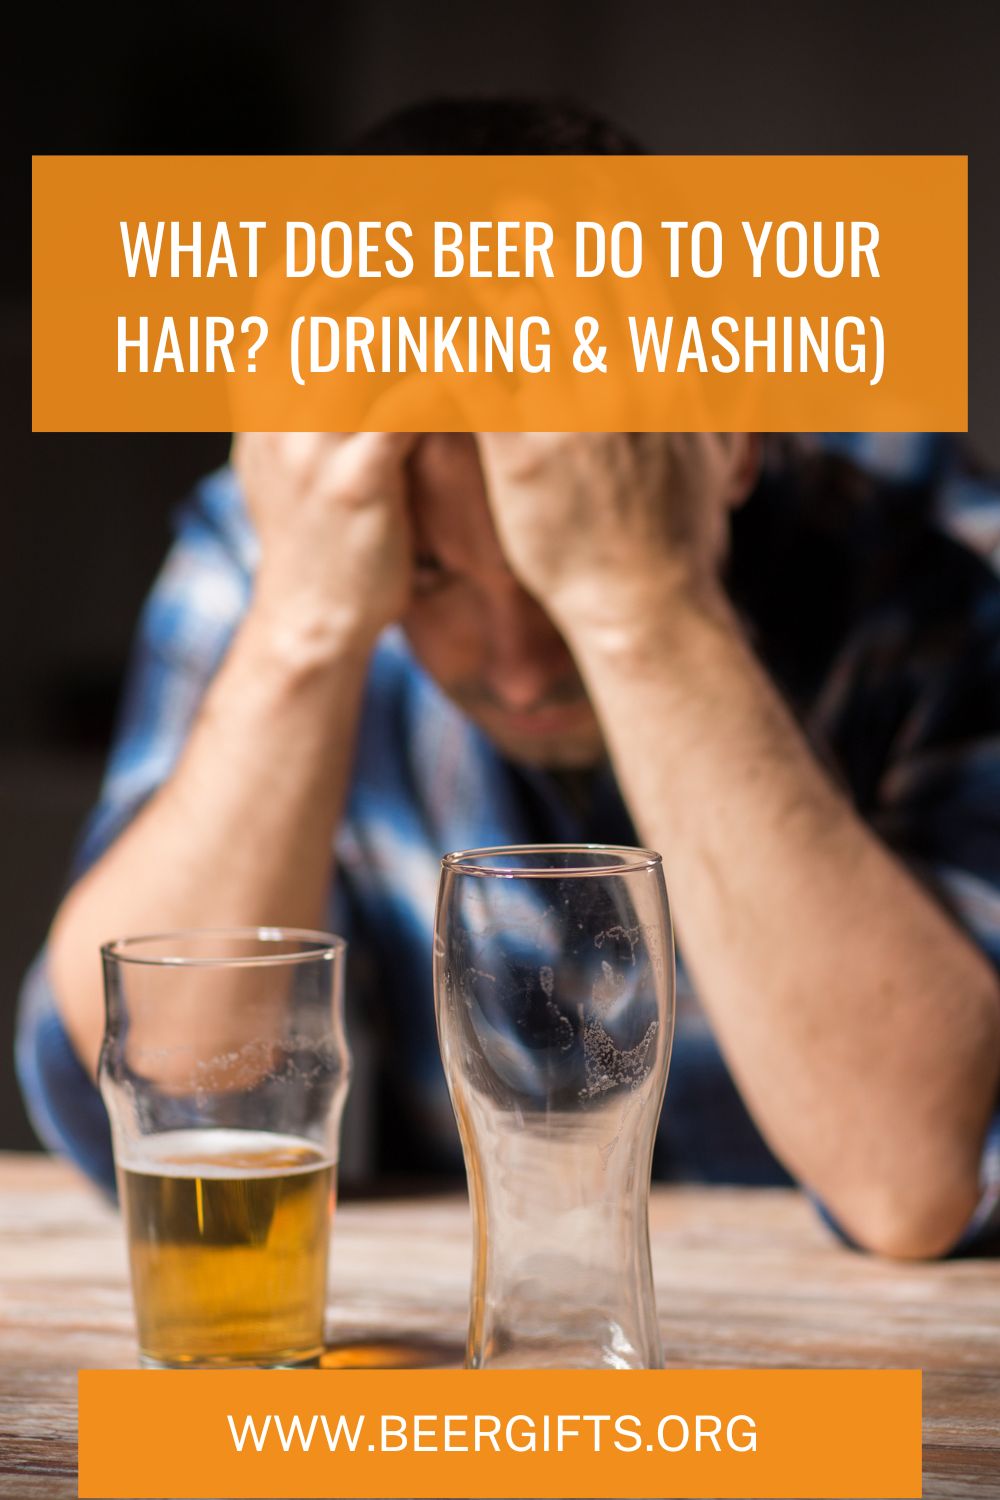 What Does Beer Do to Your Hair? (Drinking & Washing)4